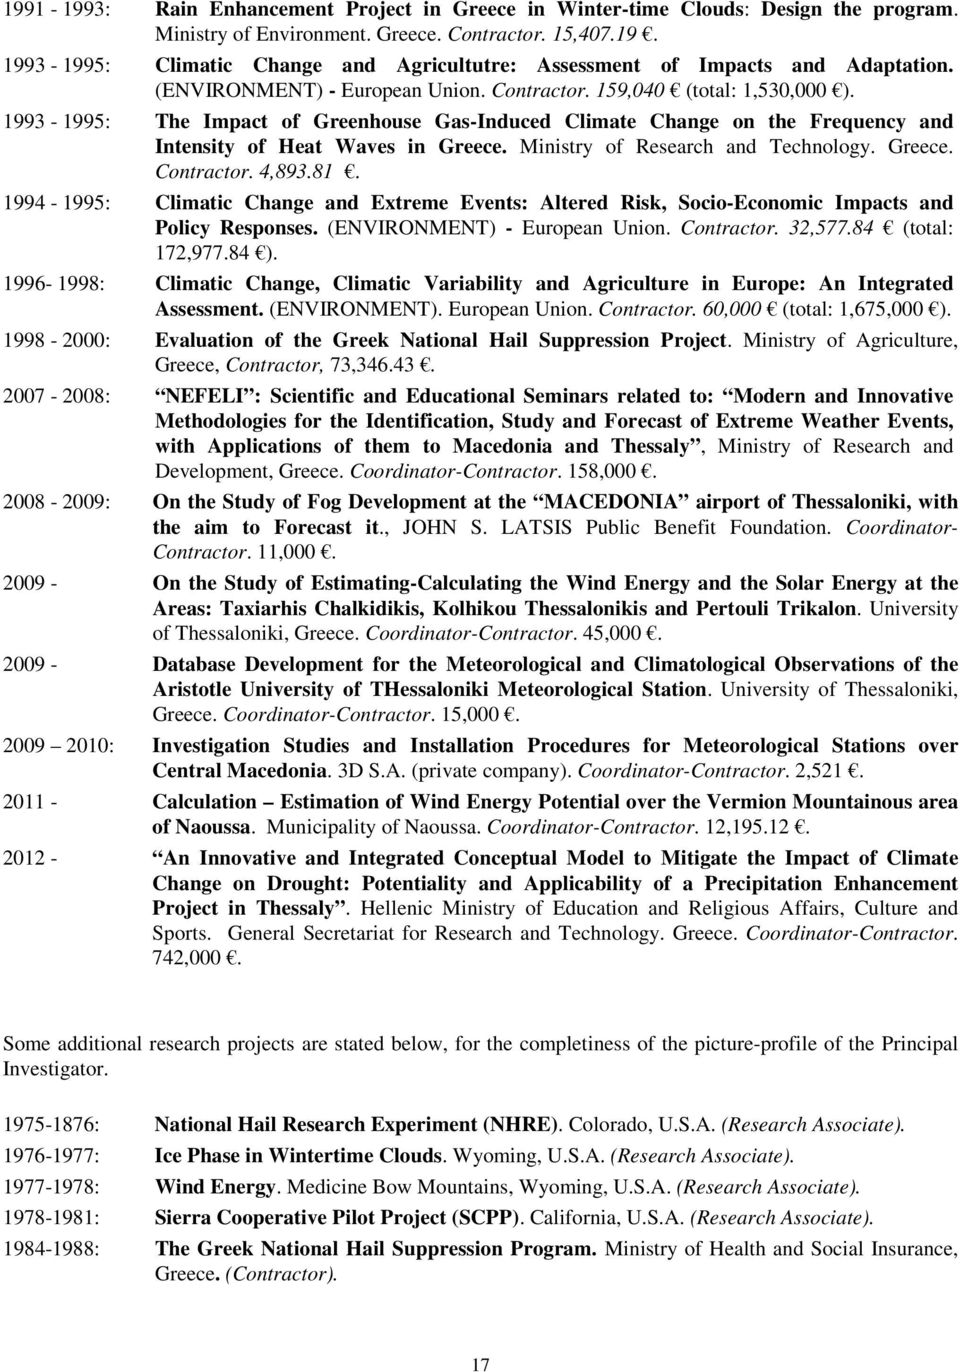 Ministry of Research and Technology. Greece. Contractor. 4,893.81. 1994-1995: Climatic Change and Extreme Events: Altered Risk, Socio-Economic Impacts and Policy Responses.